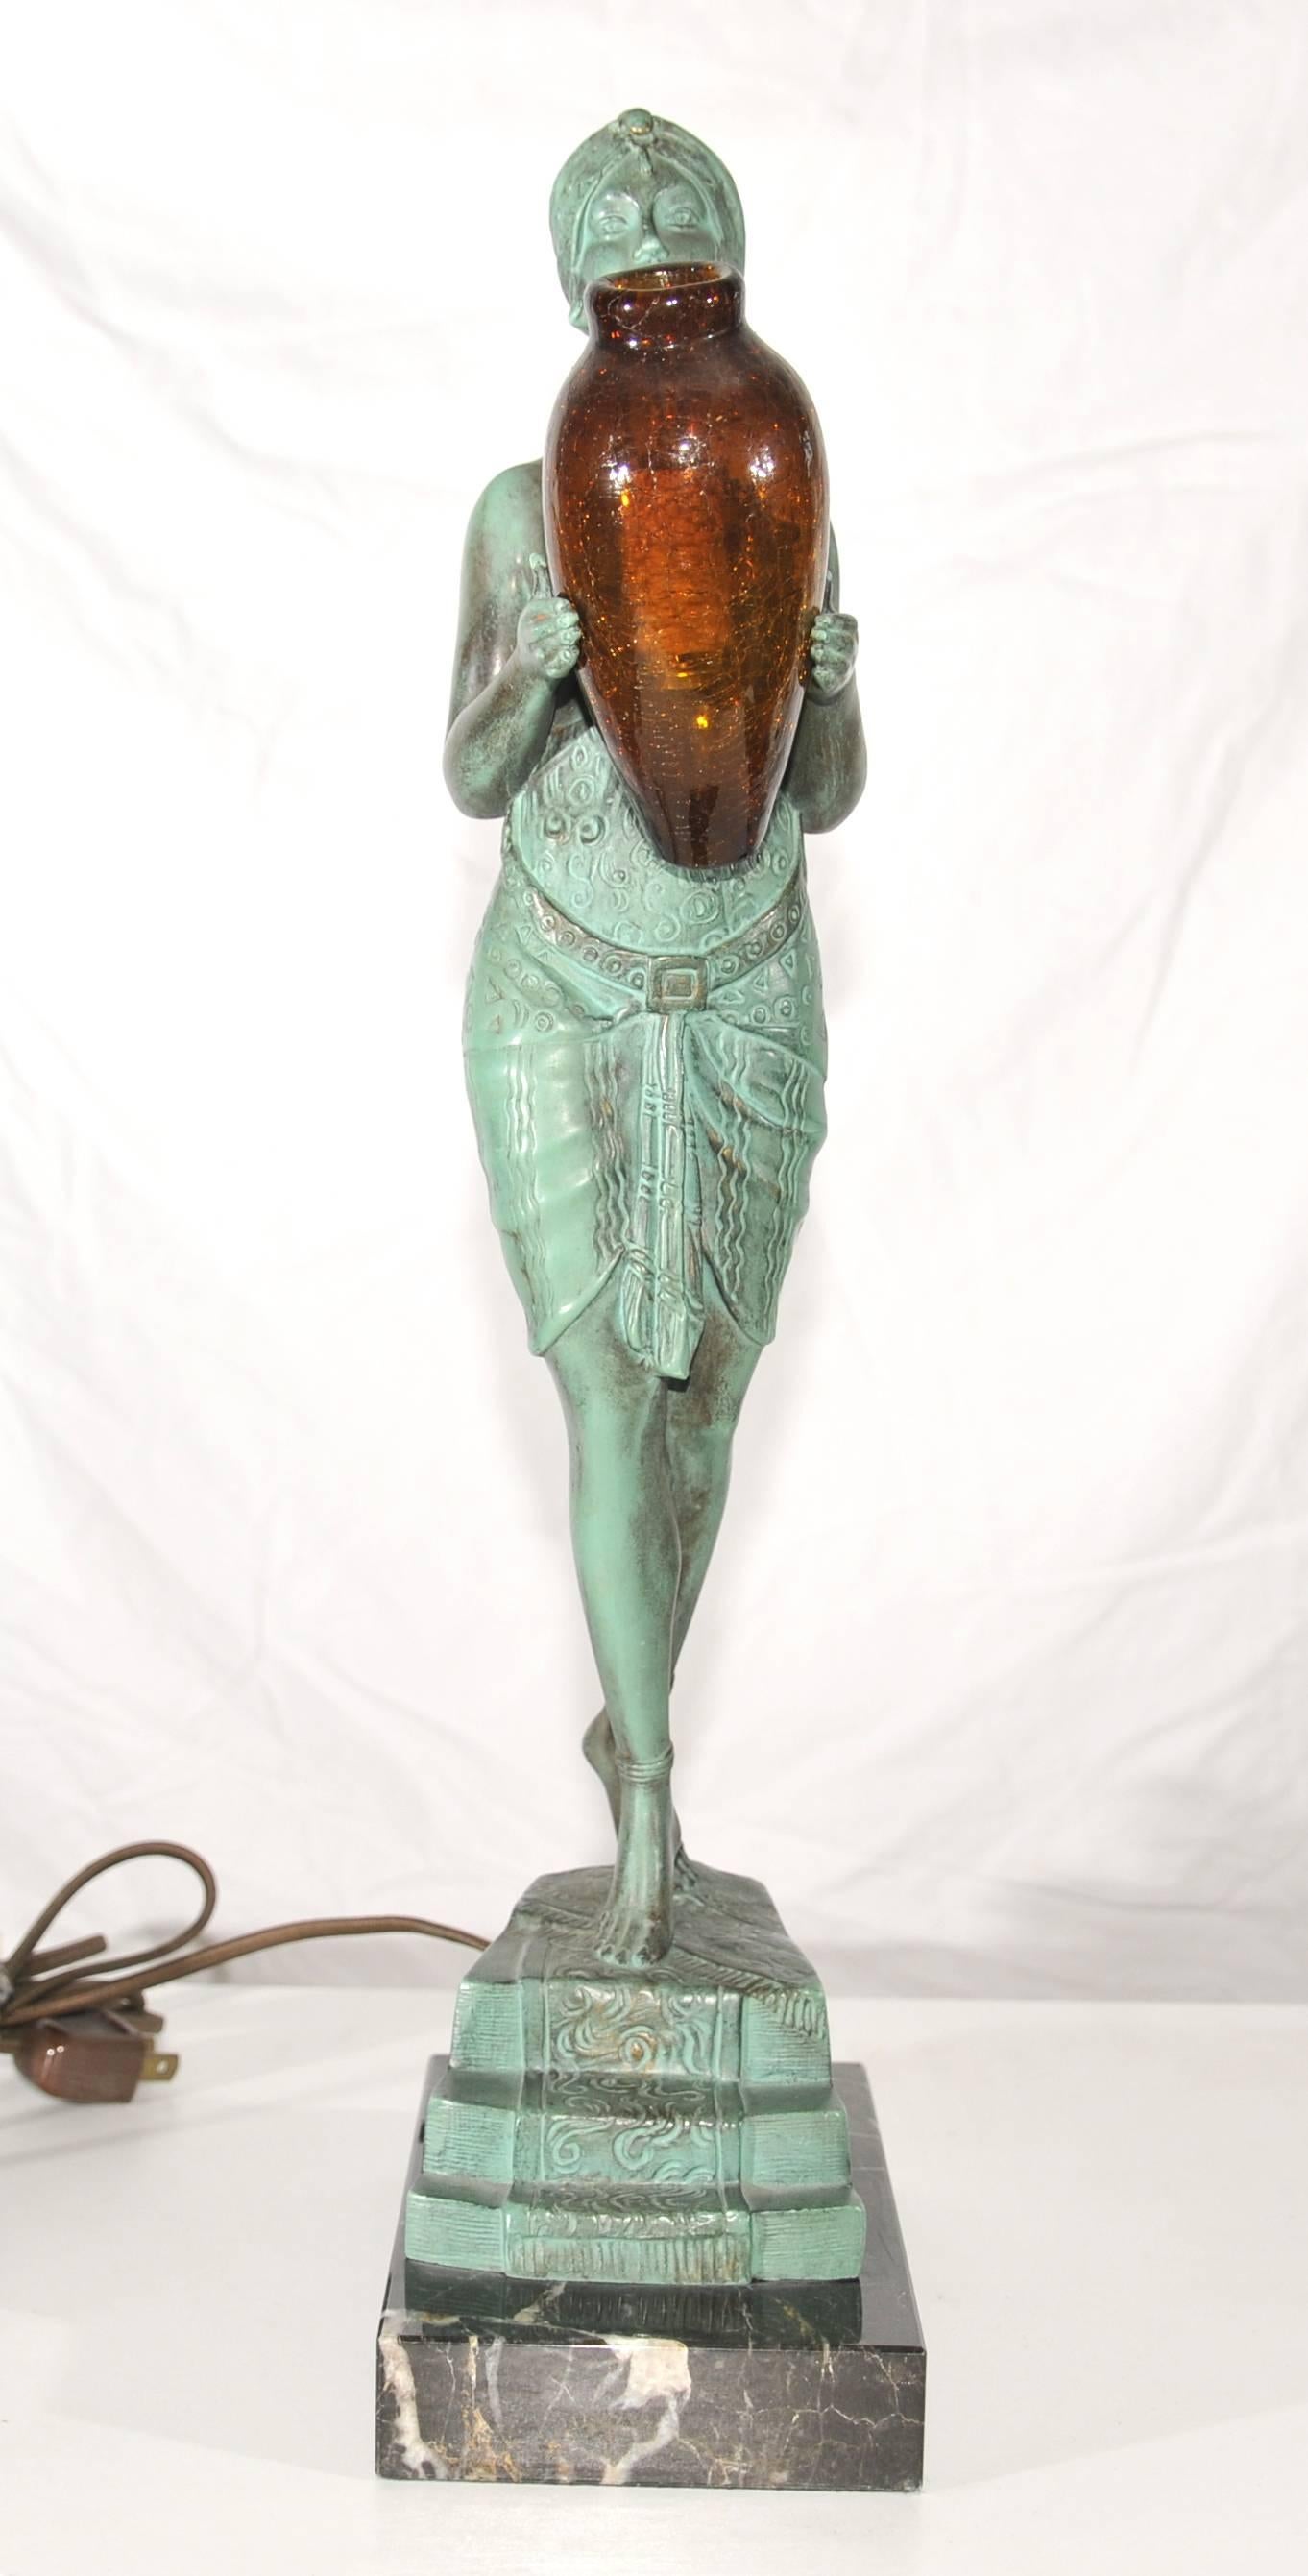 These are based in Los Angeles where we will ship from to anywhere in the world.
 Stunning Art Deco style bronze after a model by Le Faguays.
 Classic Art Deco style figurine somehow epitomises the 1920s aesthetic in it's treatment of the ideal